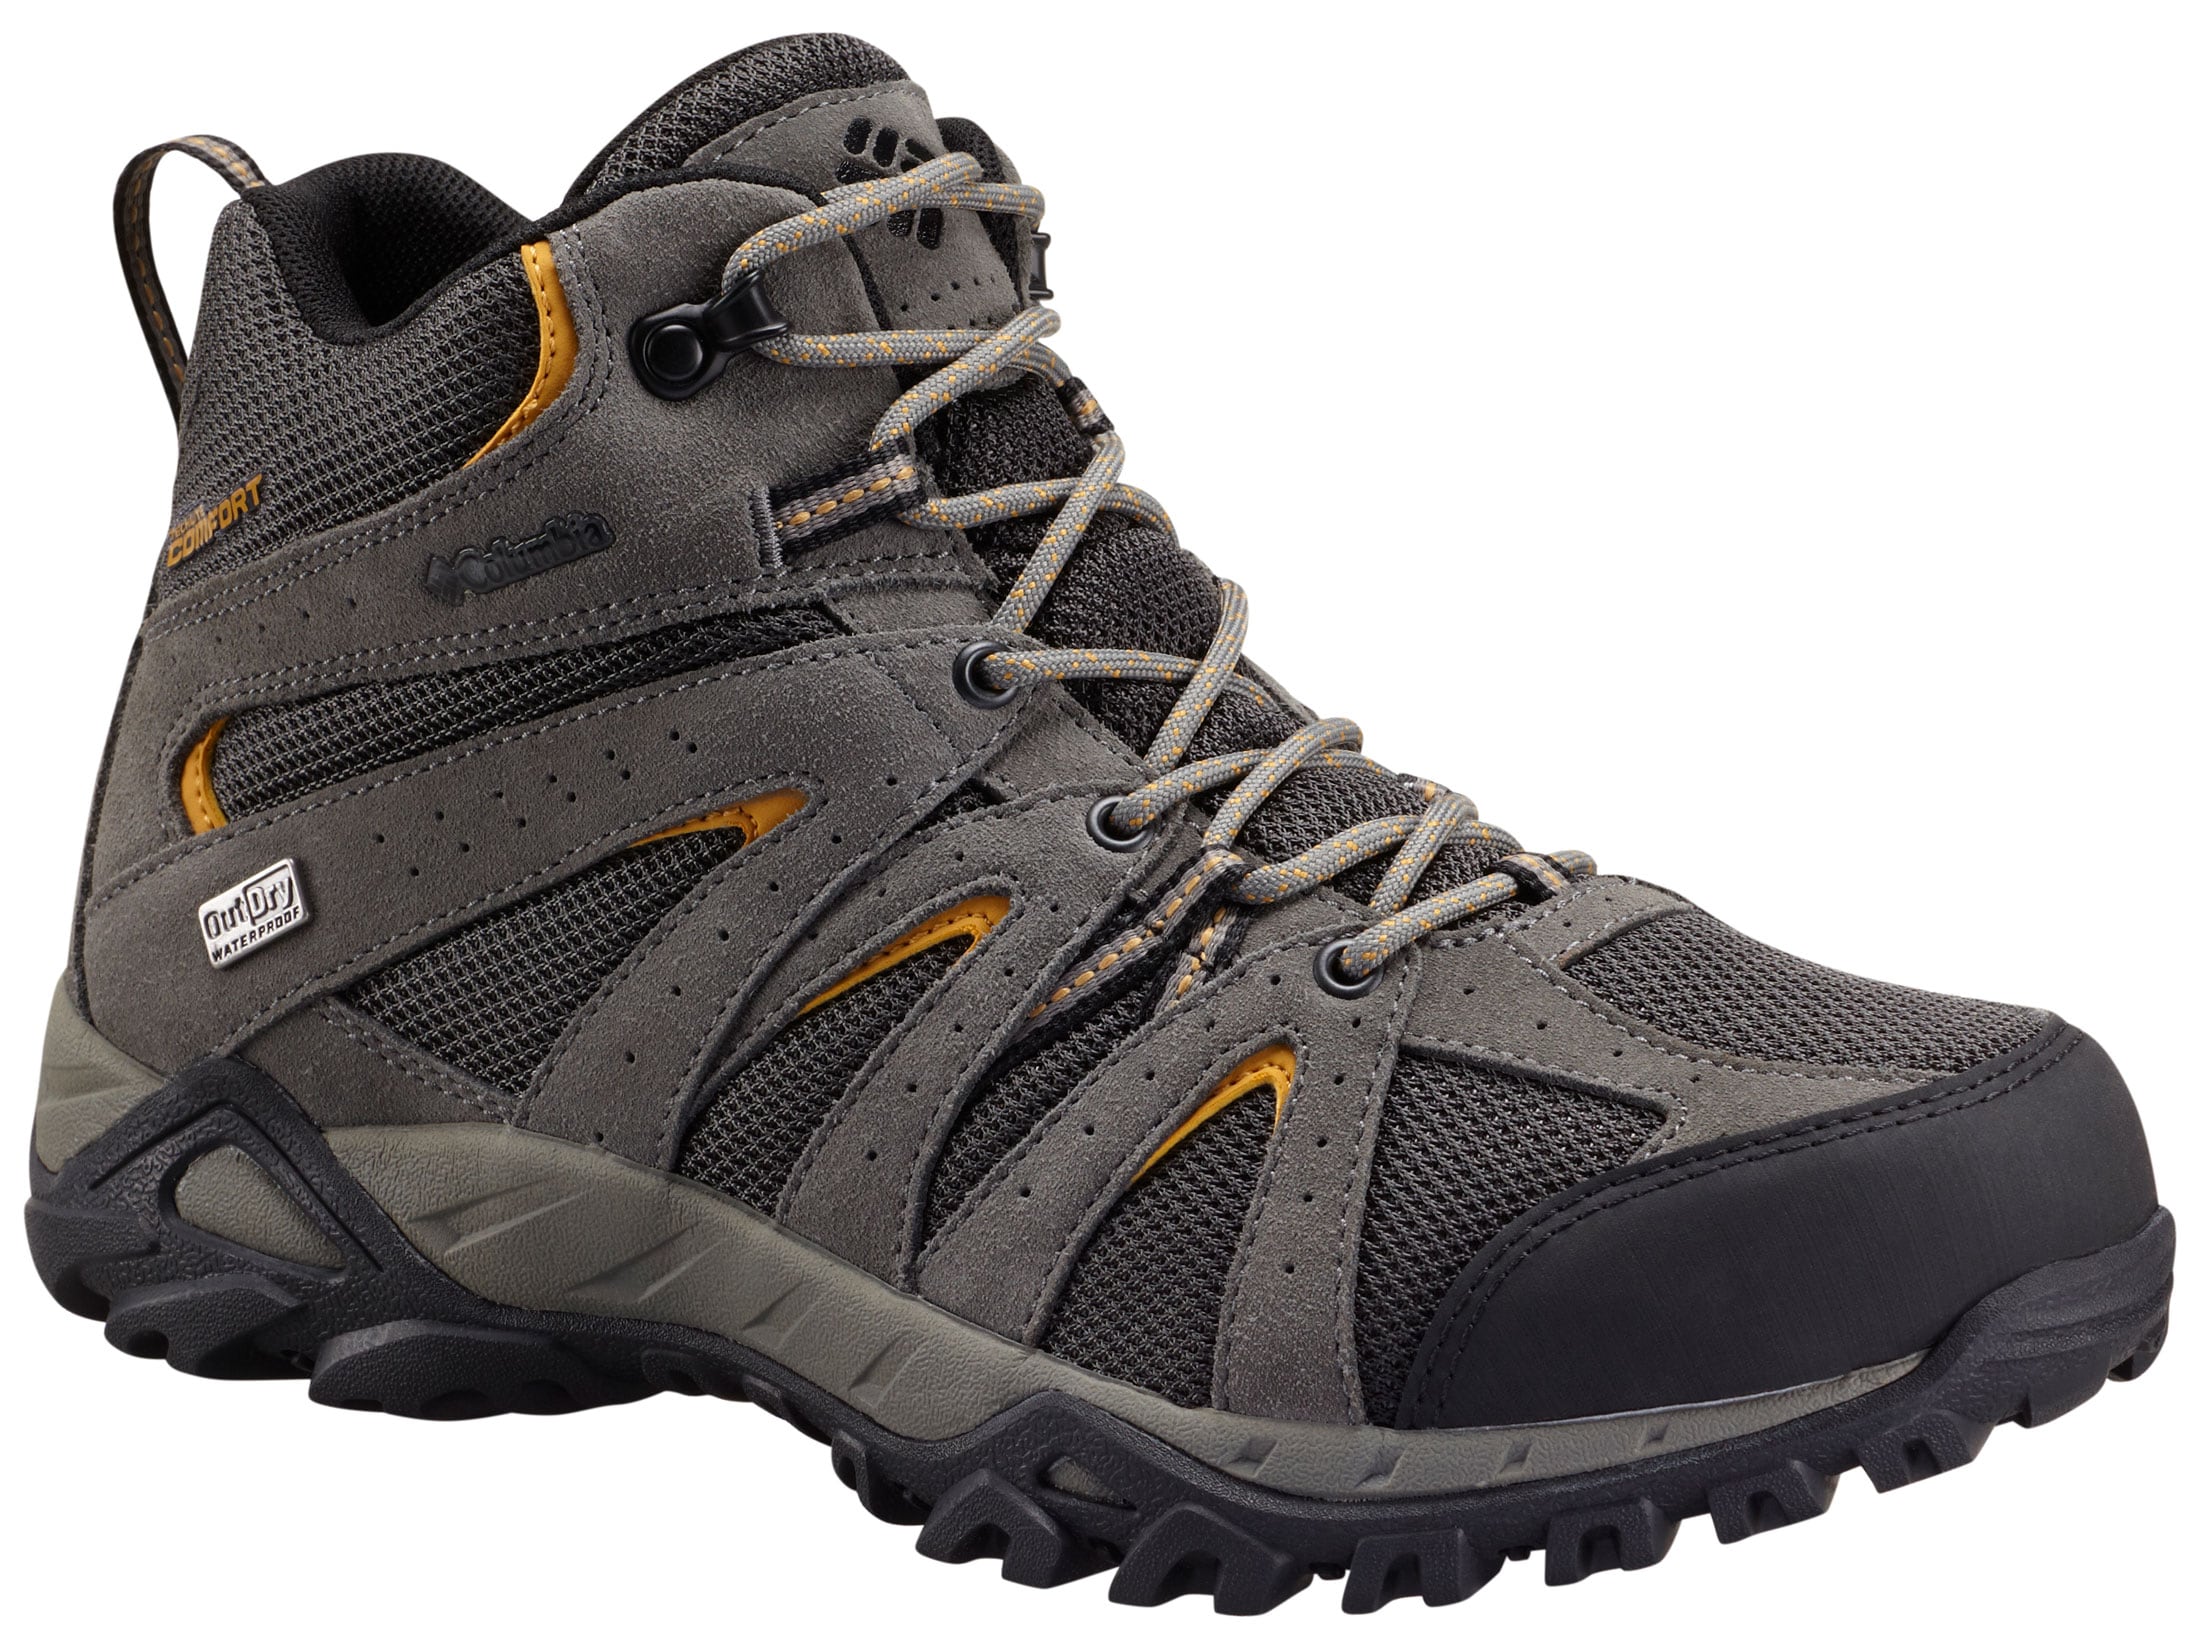 Columbia Grand Canyon Mid Outdry 6 Waterproof Hiking Boots